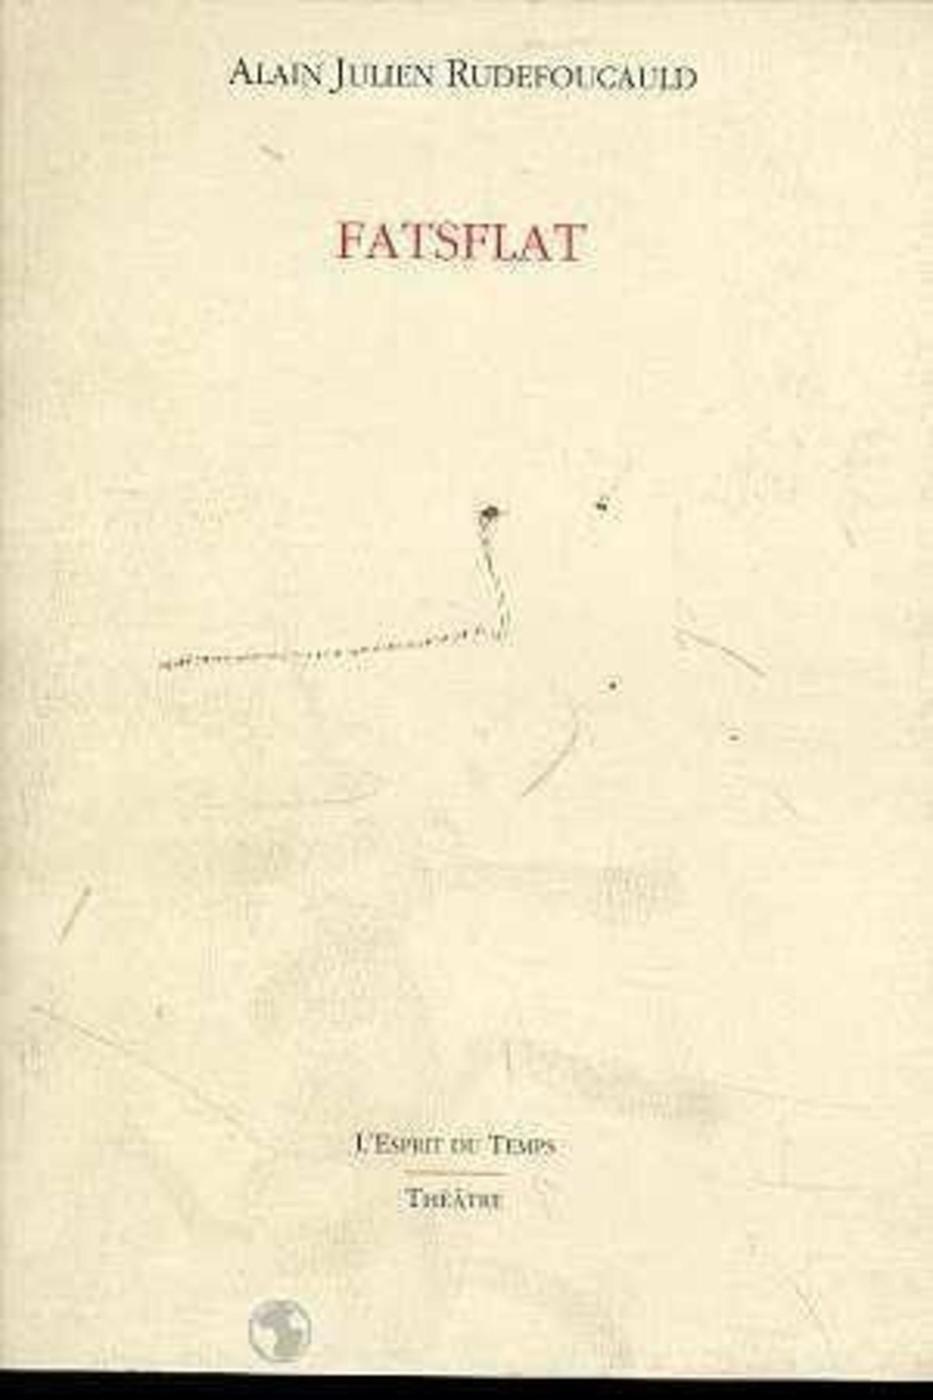 Fatsflat (9782908206654-front-cover)